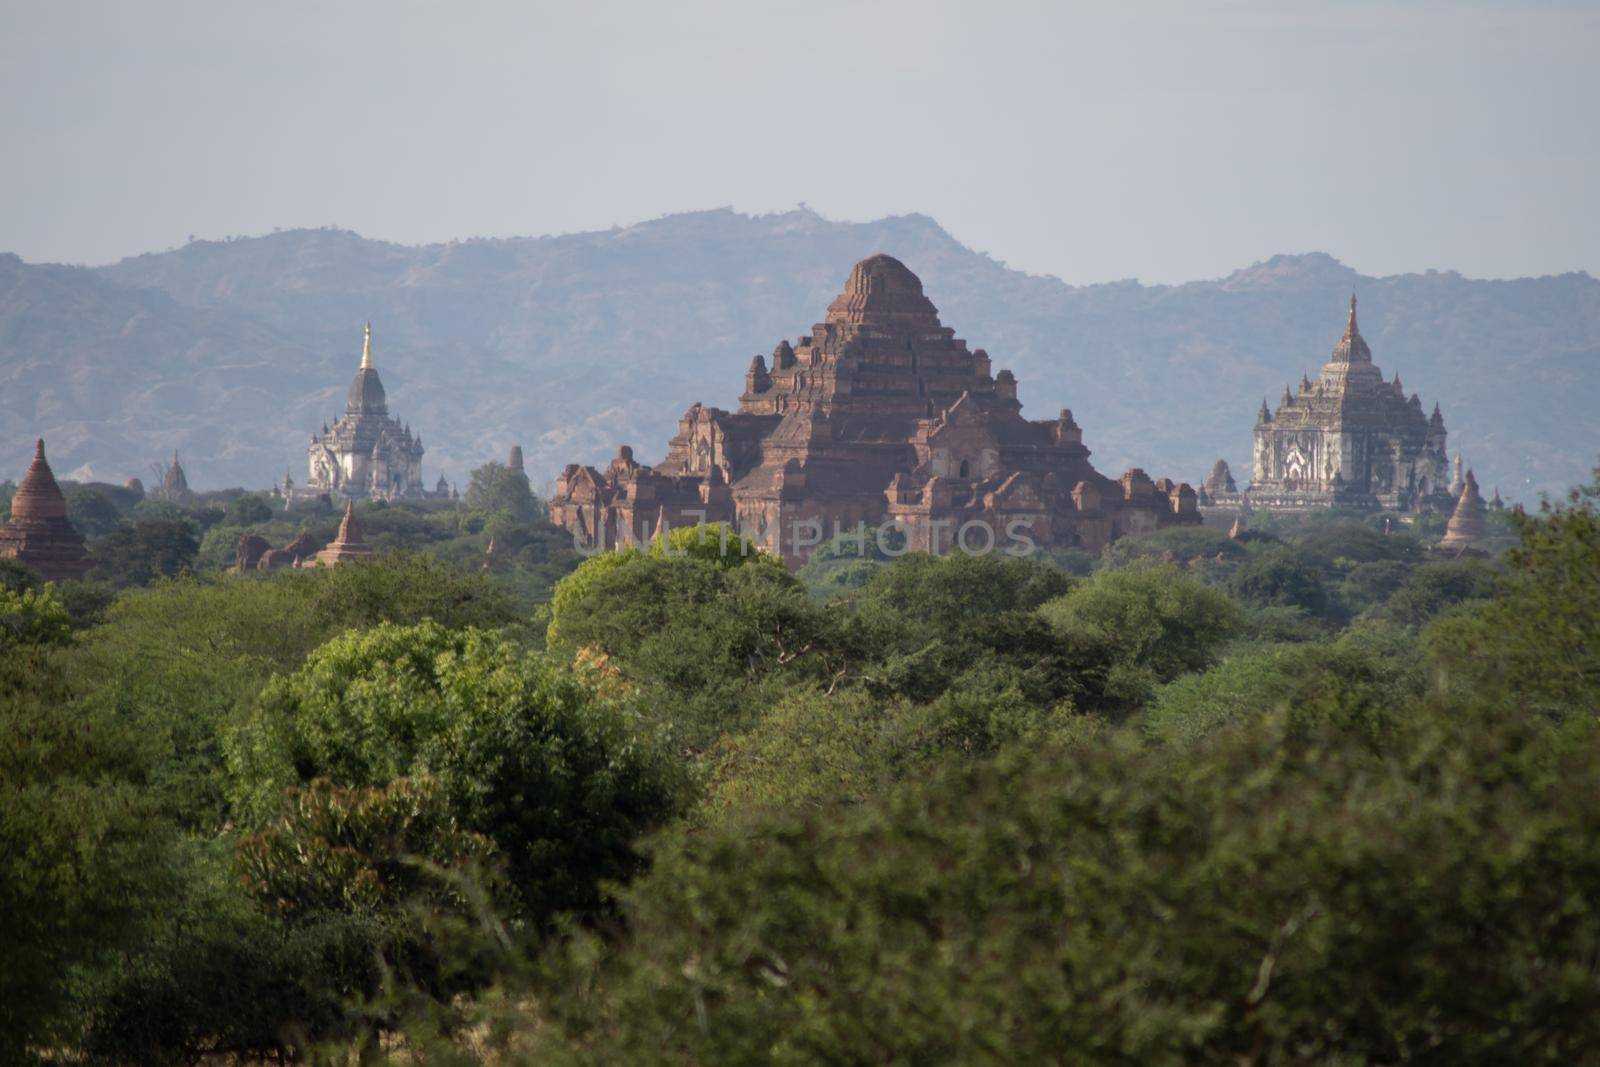 BAGAN, NYAUNG-U, MYANMAR - 3 JANUARY 2020: The top of old and historical temples peaking out above the tree vegetation in the distance